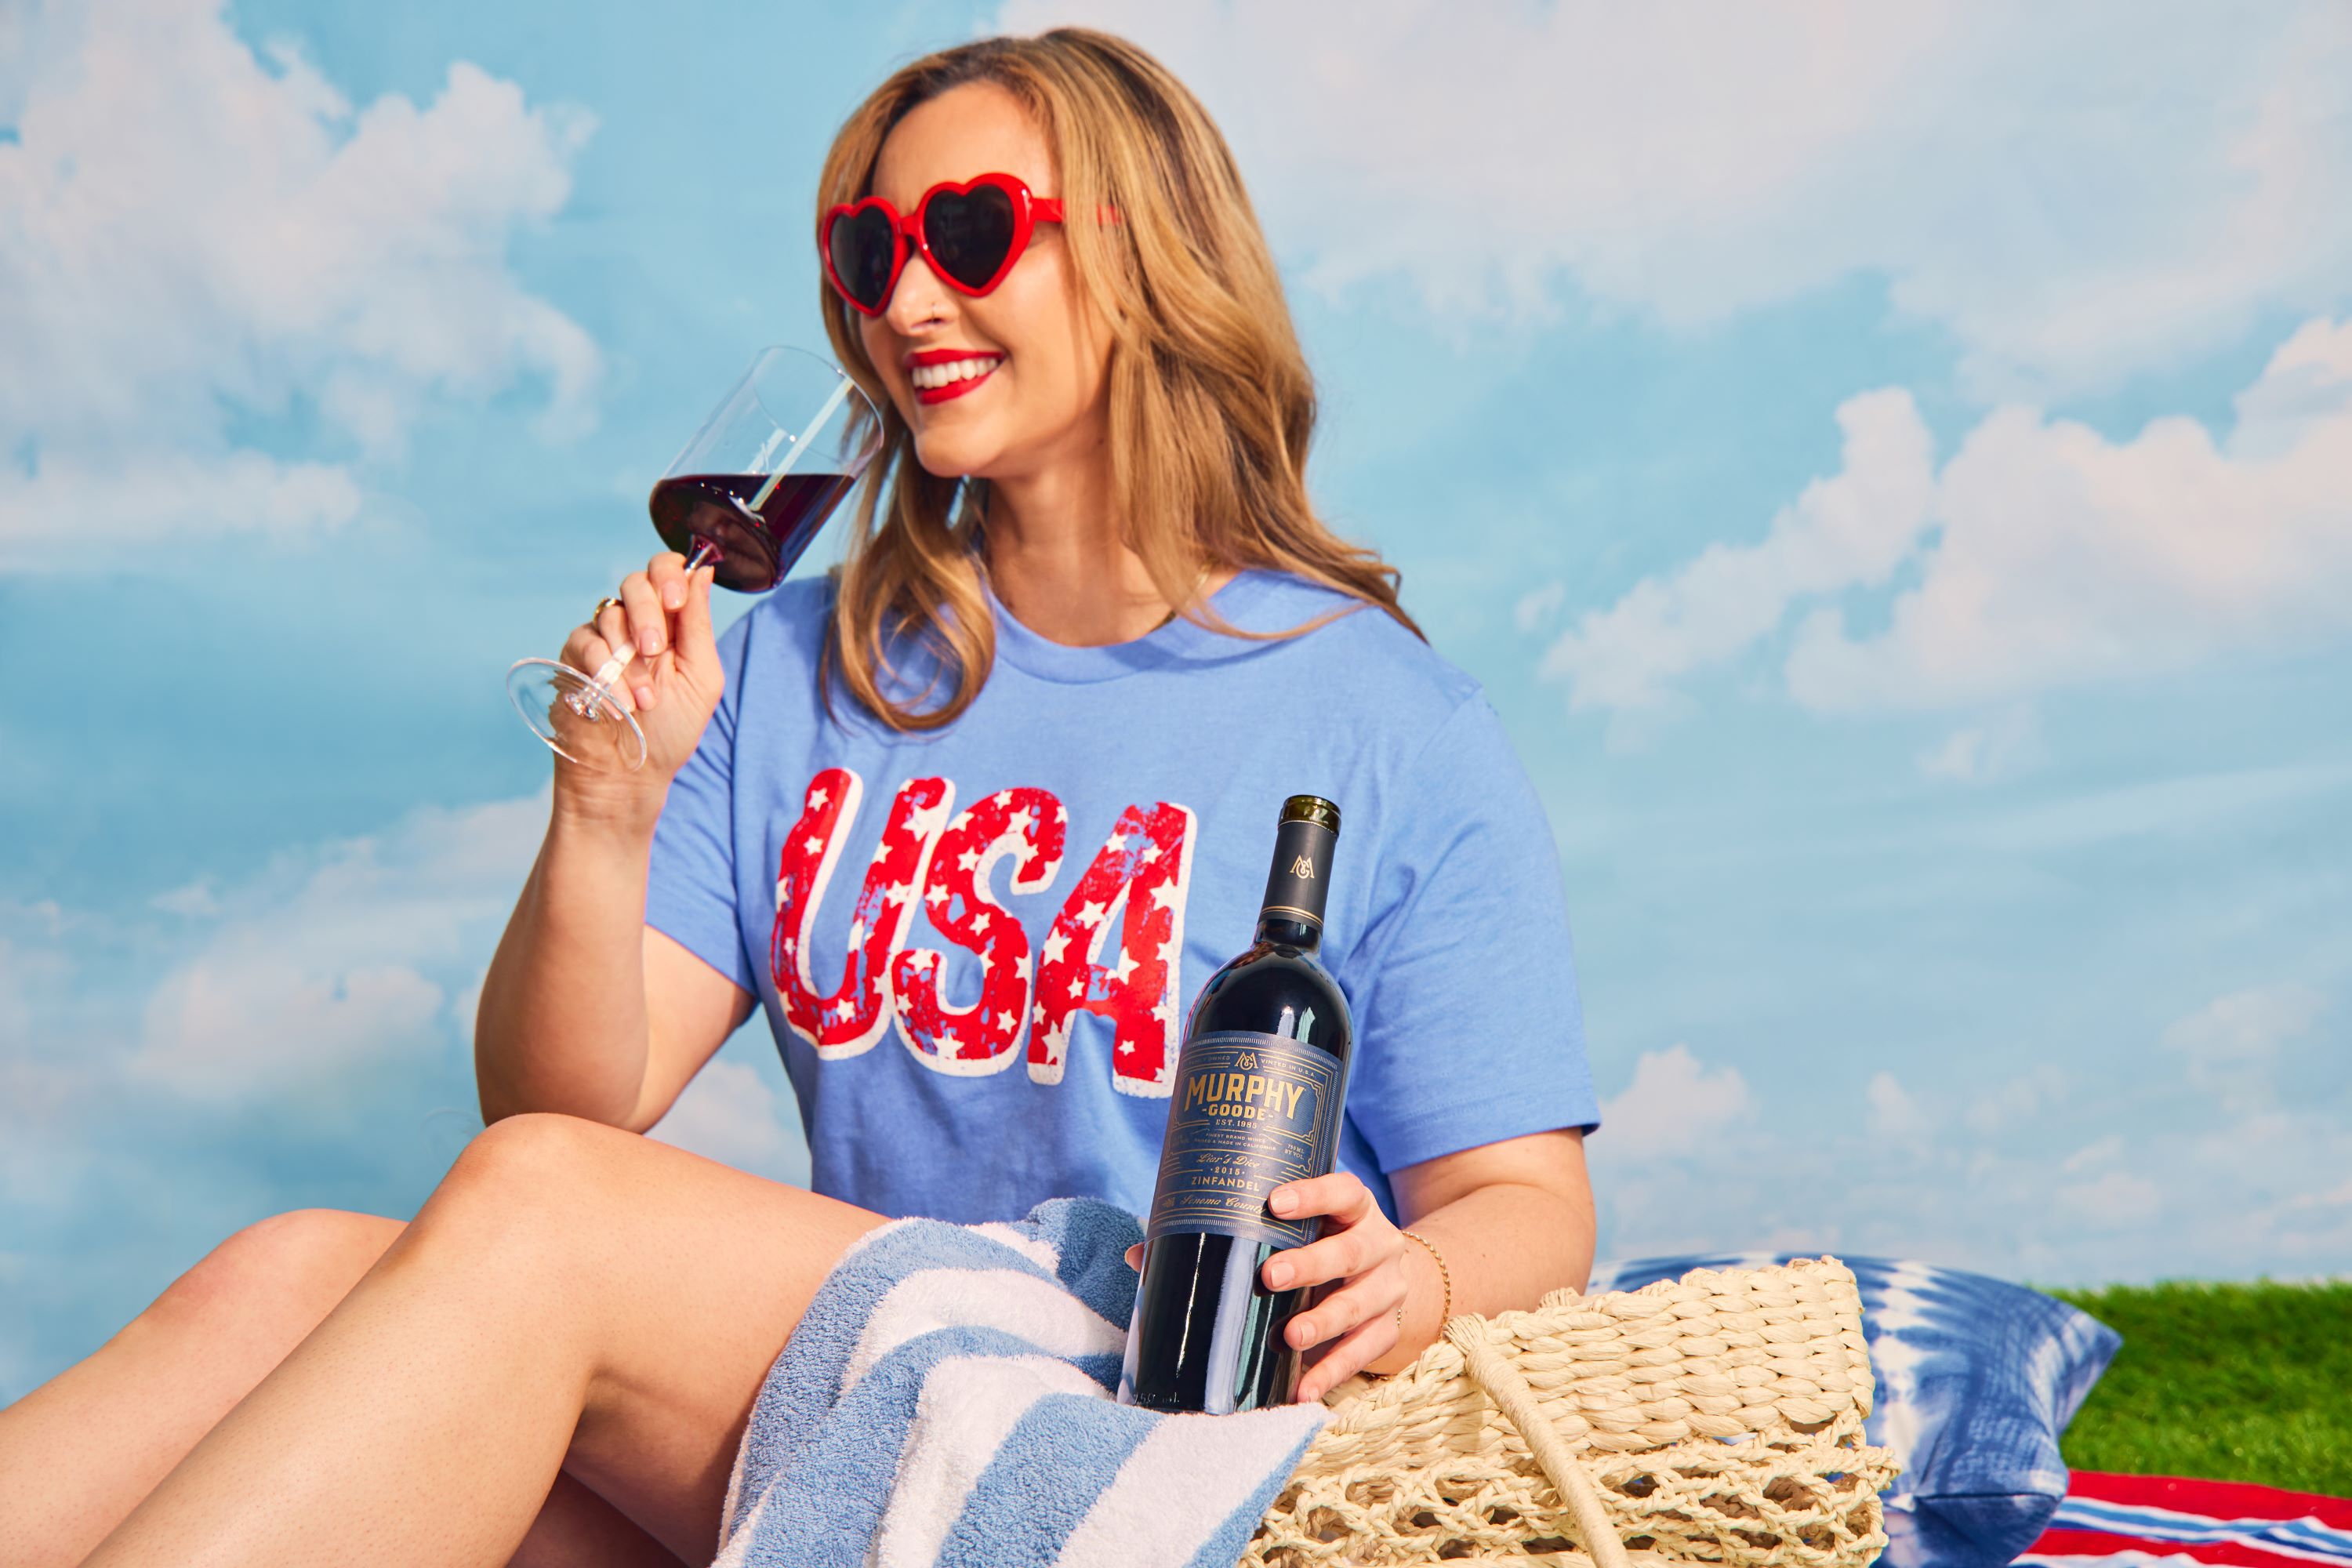 Woman sitting poolside with wine in bucket on ice